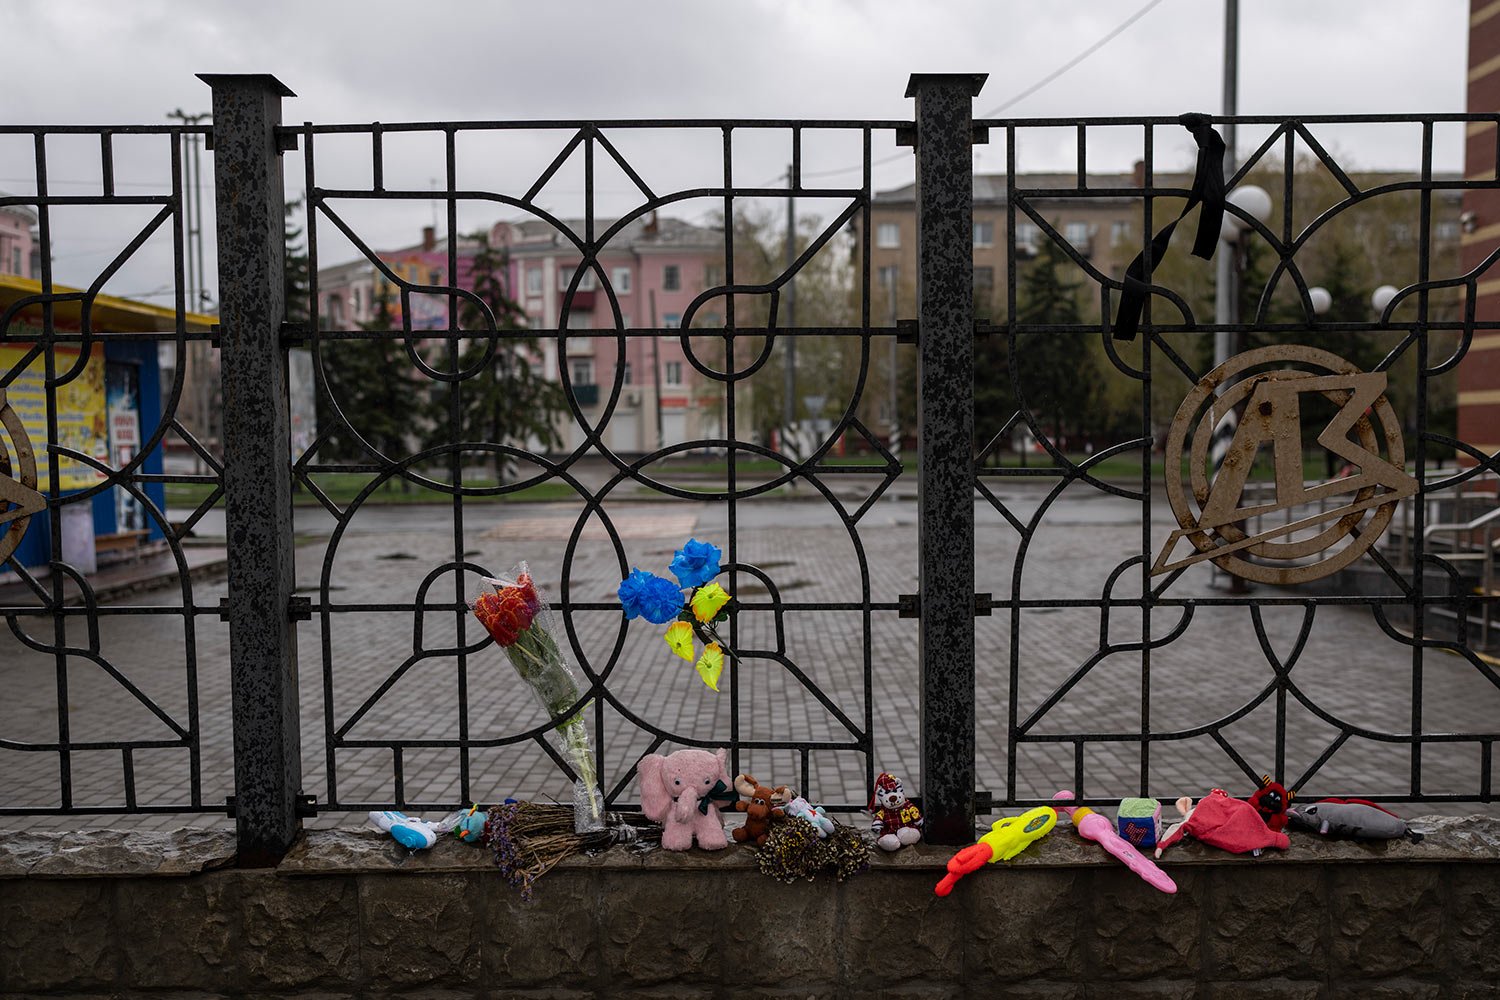  Flowers and toys were left on a fence at the railway station in Kramatorsk, Ukraine, Thursday, April 14, 2022. A missile strike killed at least 59 people and wounded dozens more when a rocket hit the railway station on Friday, April 8. (AP Photo/Pet